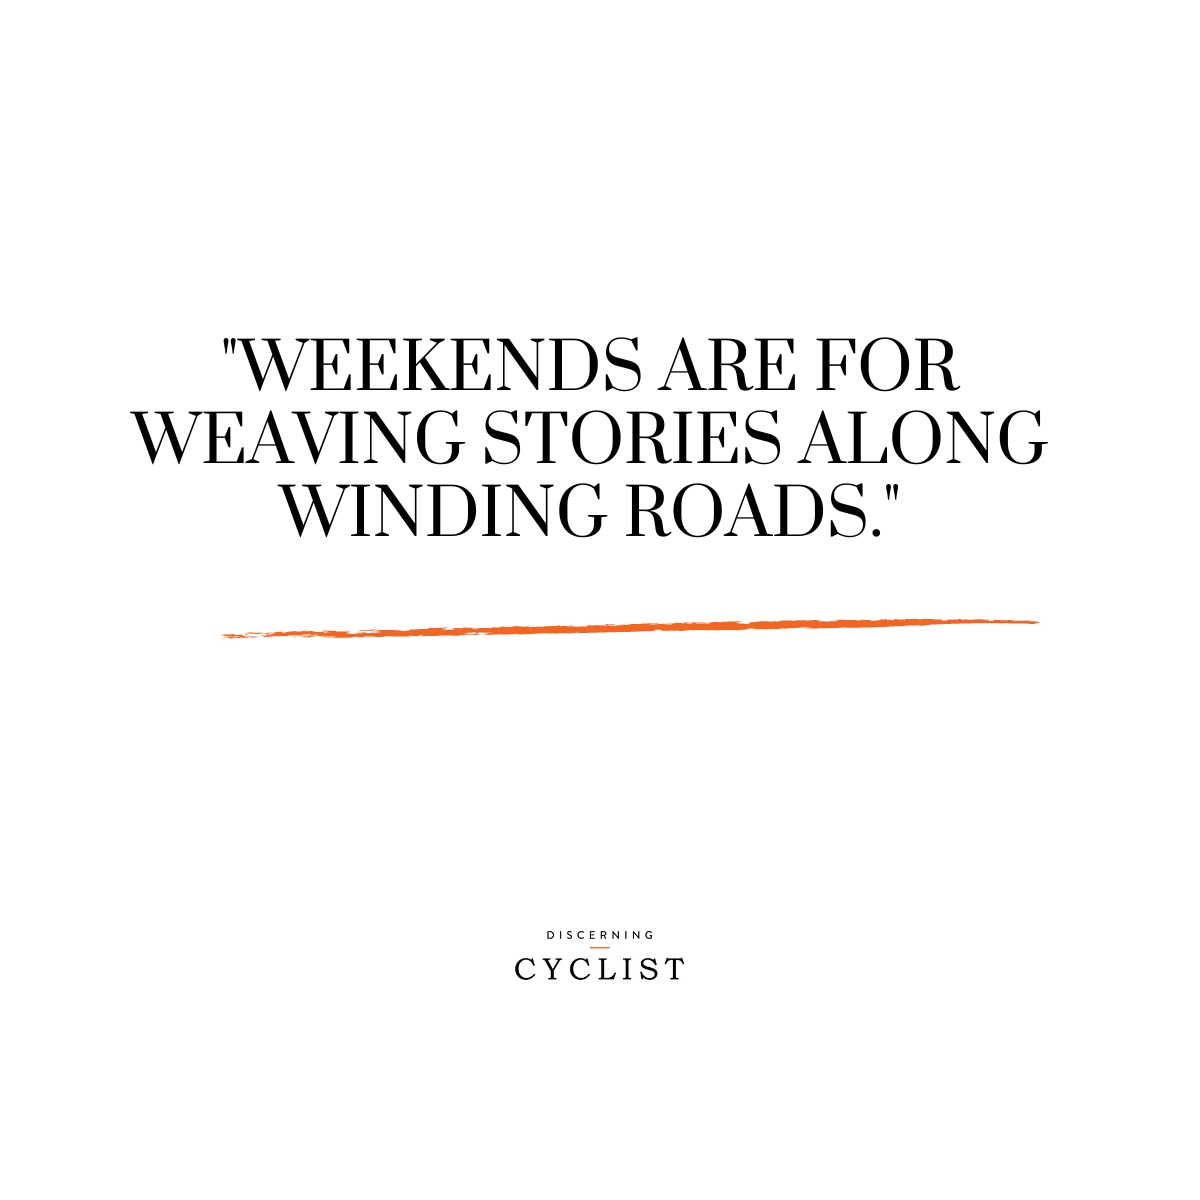 "Weekends are for weaving stories along winding roads."